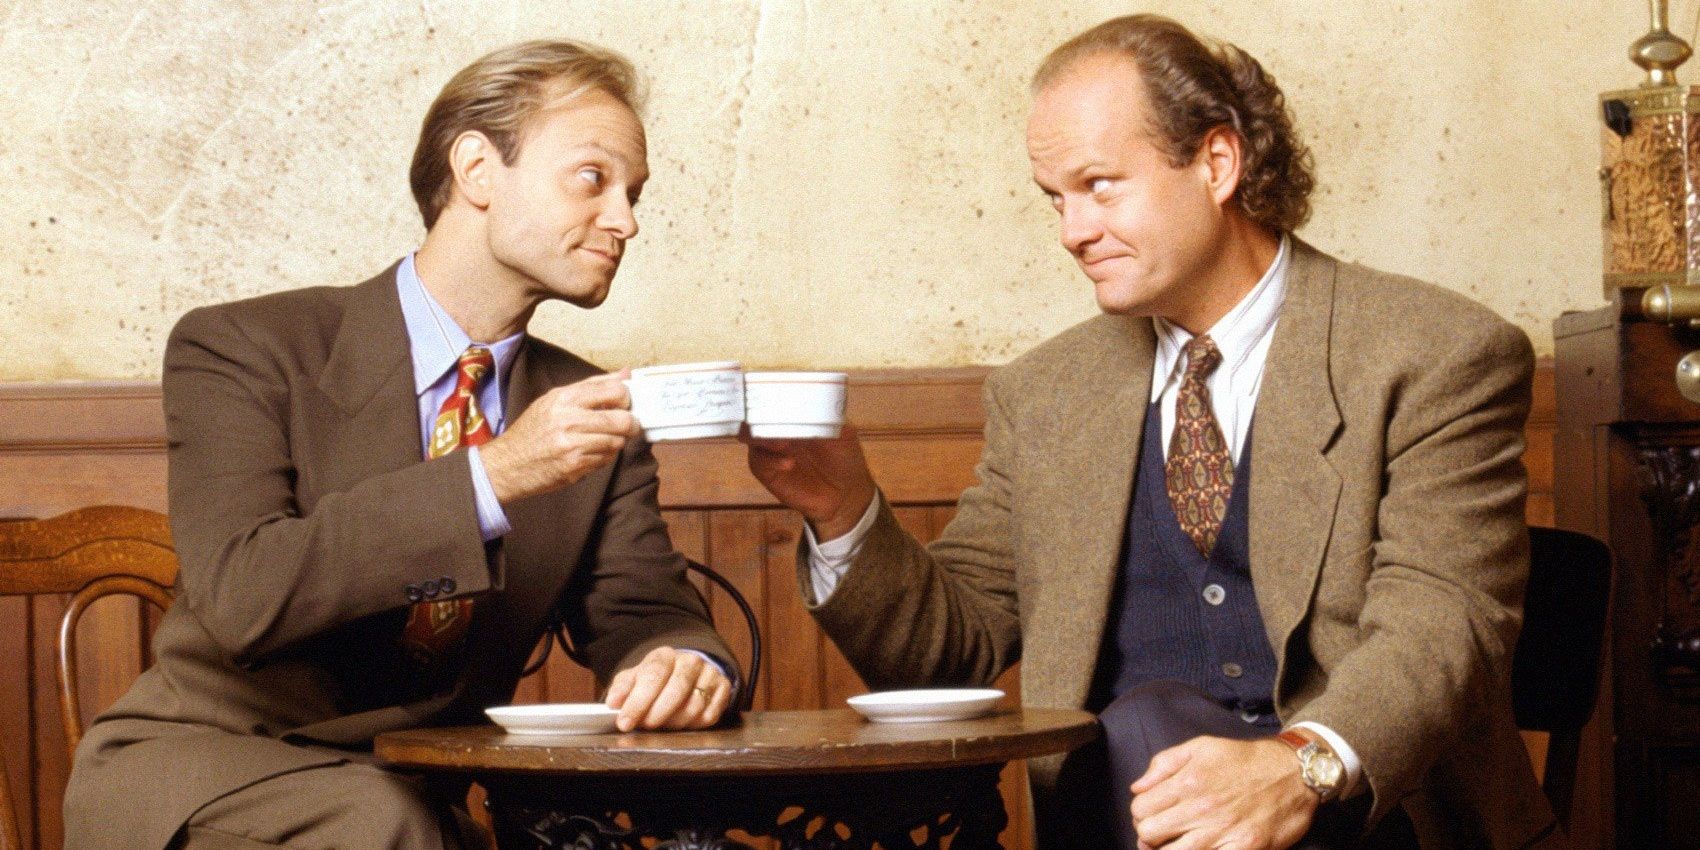 Frasier and Niles having coffee in a promotional image for Frasier